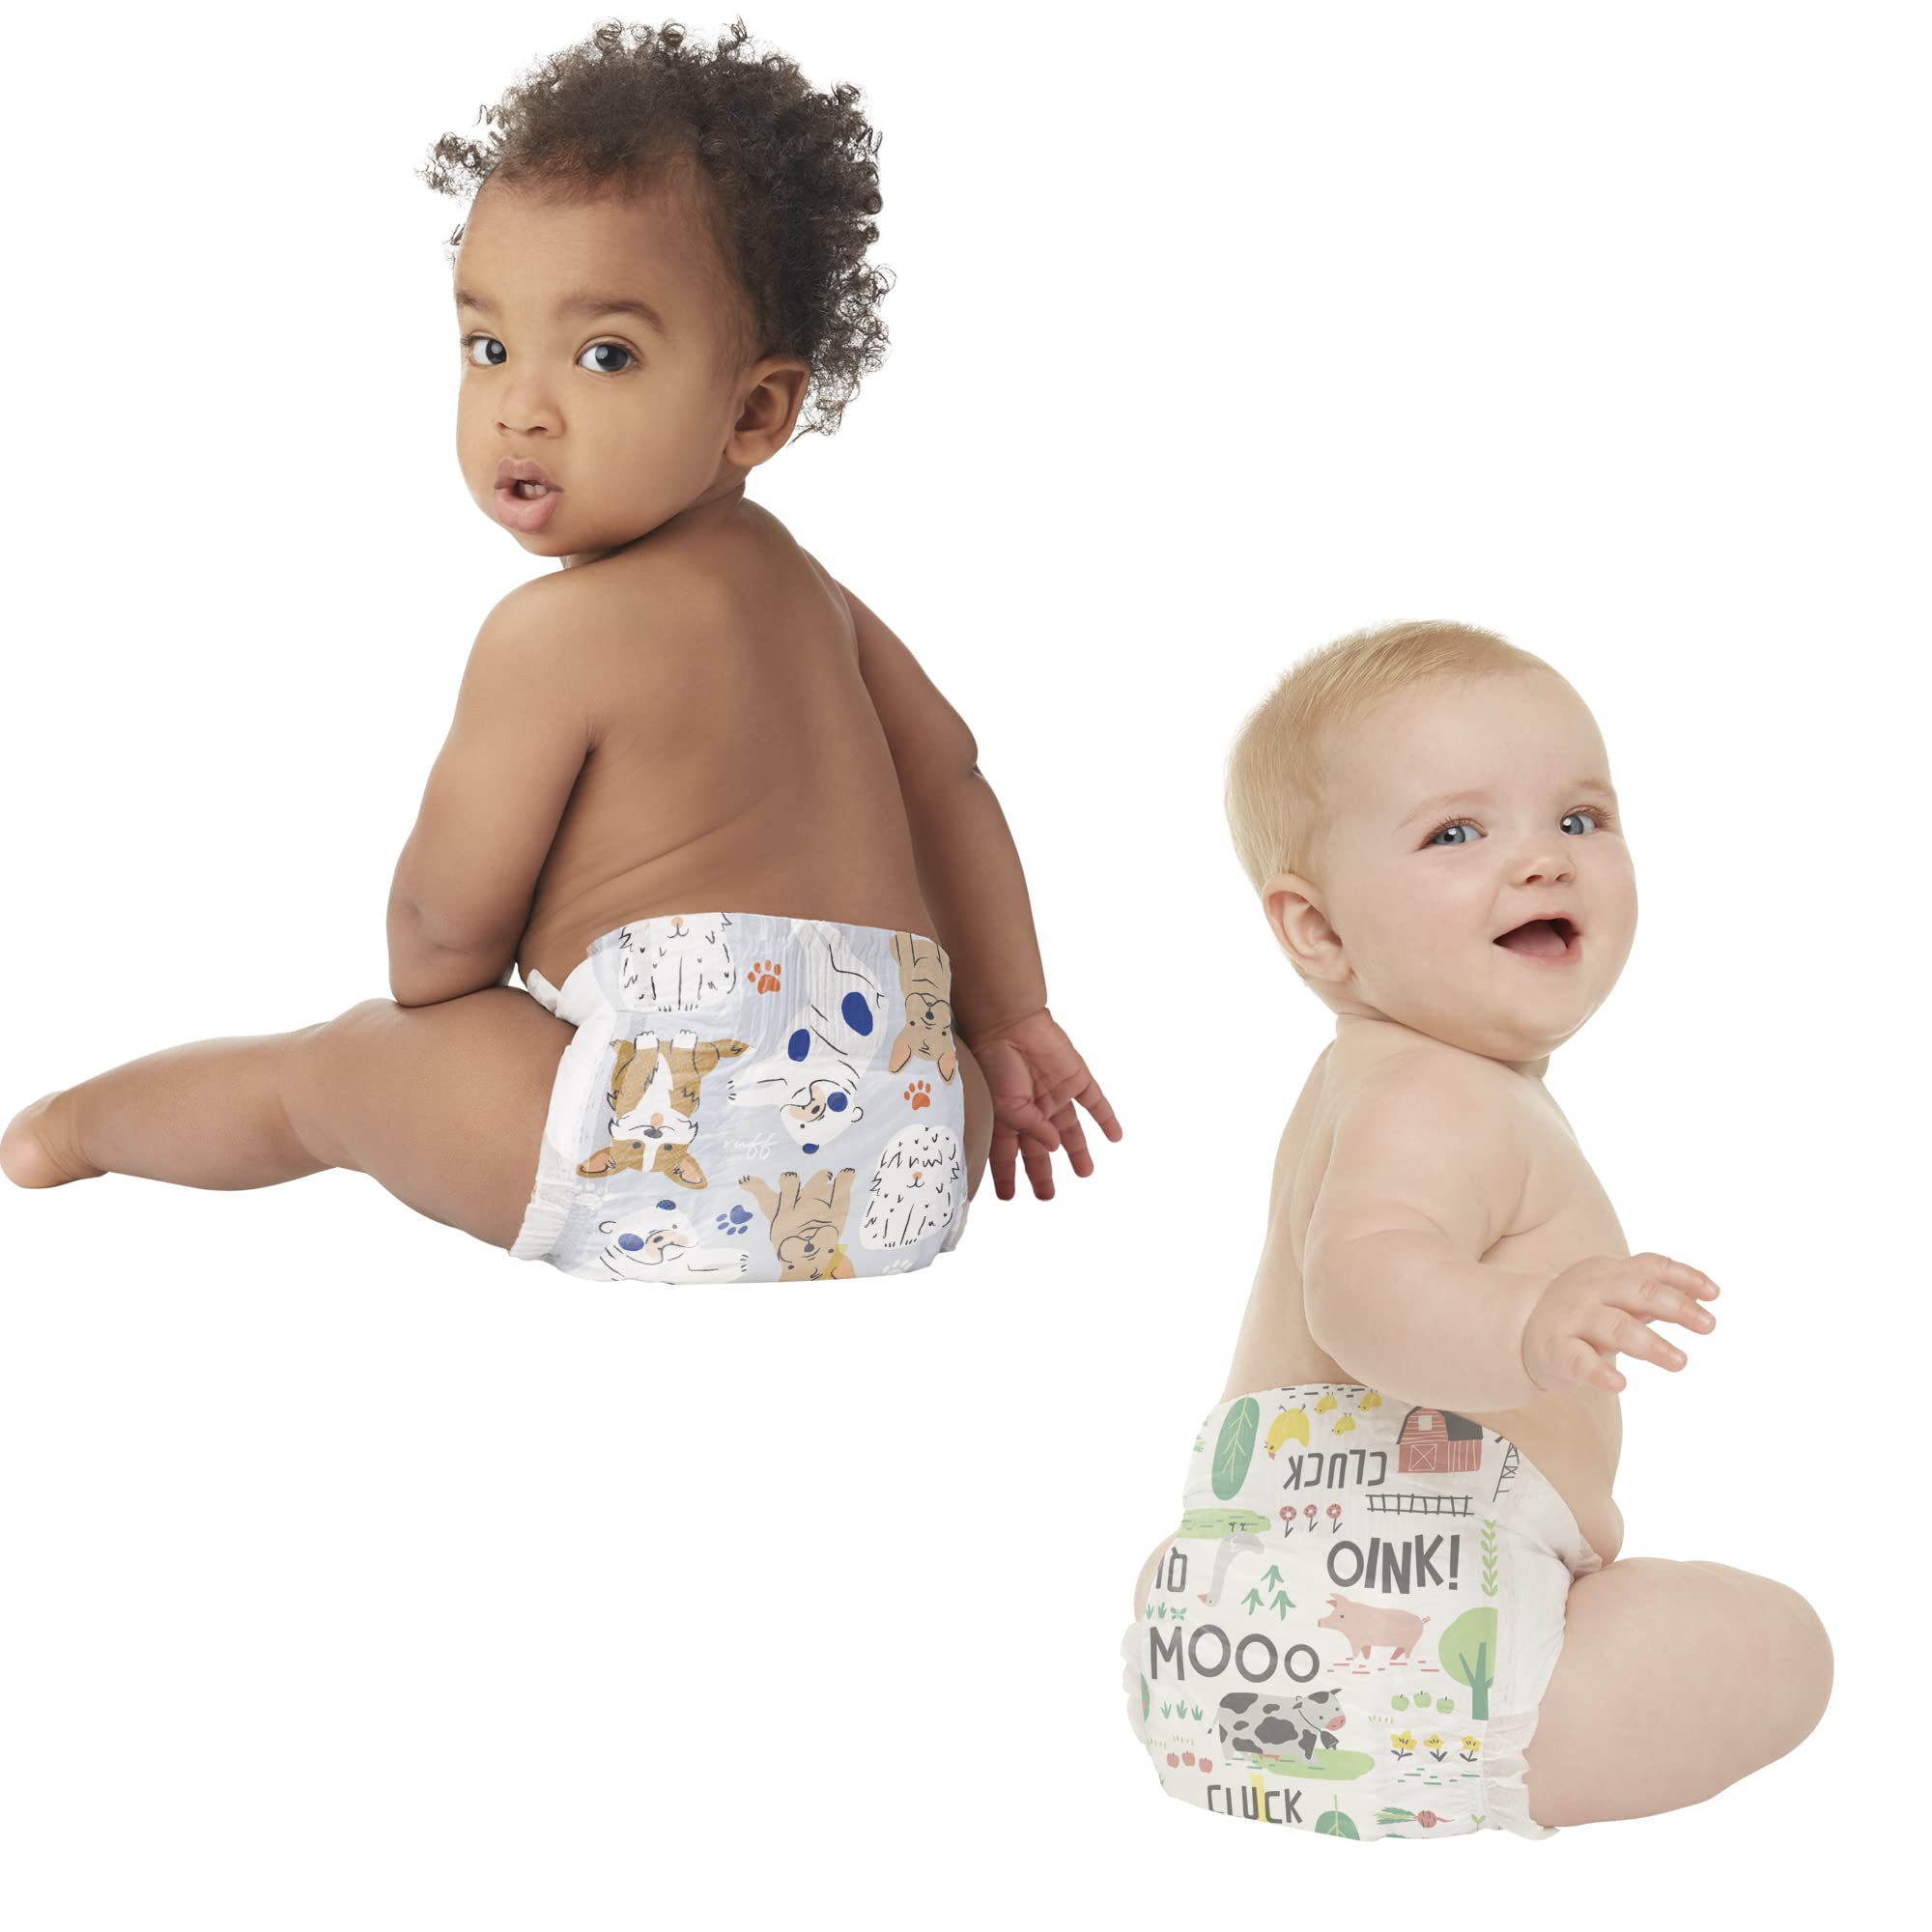 The Honest Company Clean Conscious Diapers | Plant-Based, Sustainable | Barnyard Babies + It’s A Pawty | Super Club Box, Size 7 (41+ lbs), 72 Count